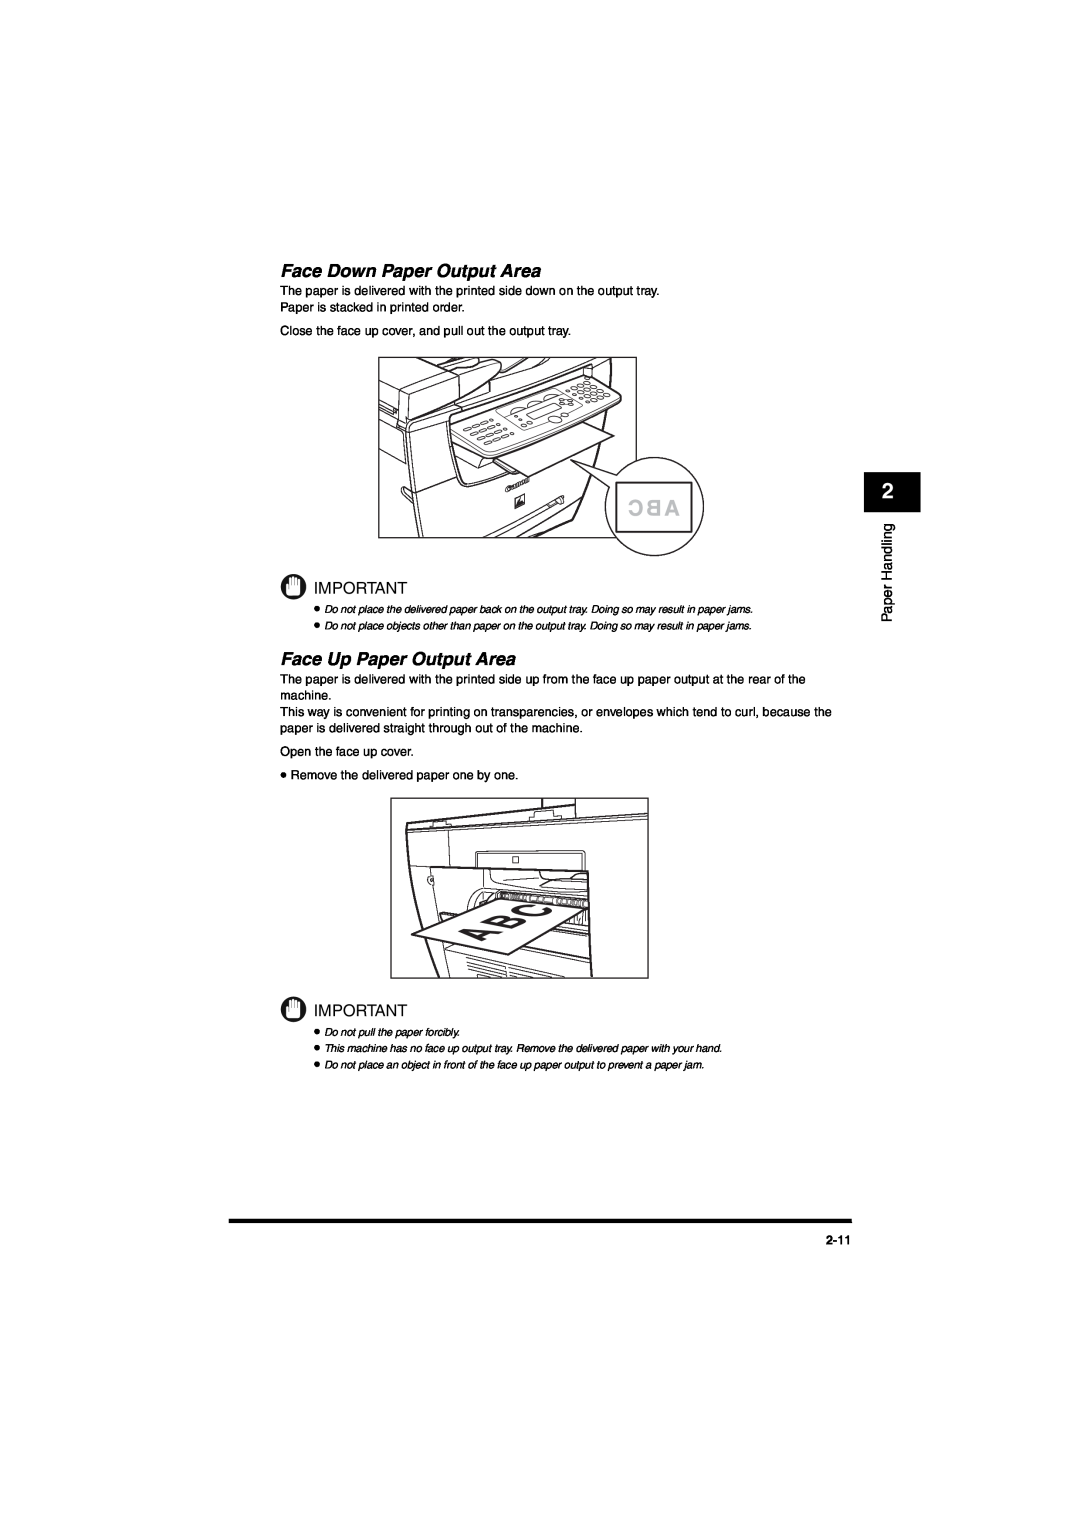 Canon MF5650 manual Face Down Paper Output Area, Face Up Paper Output Area, Paper Handling 